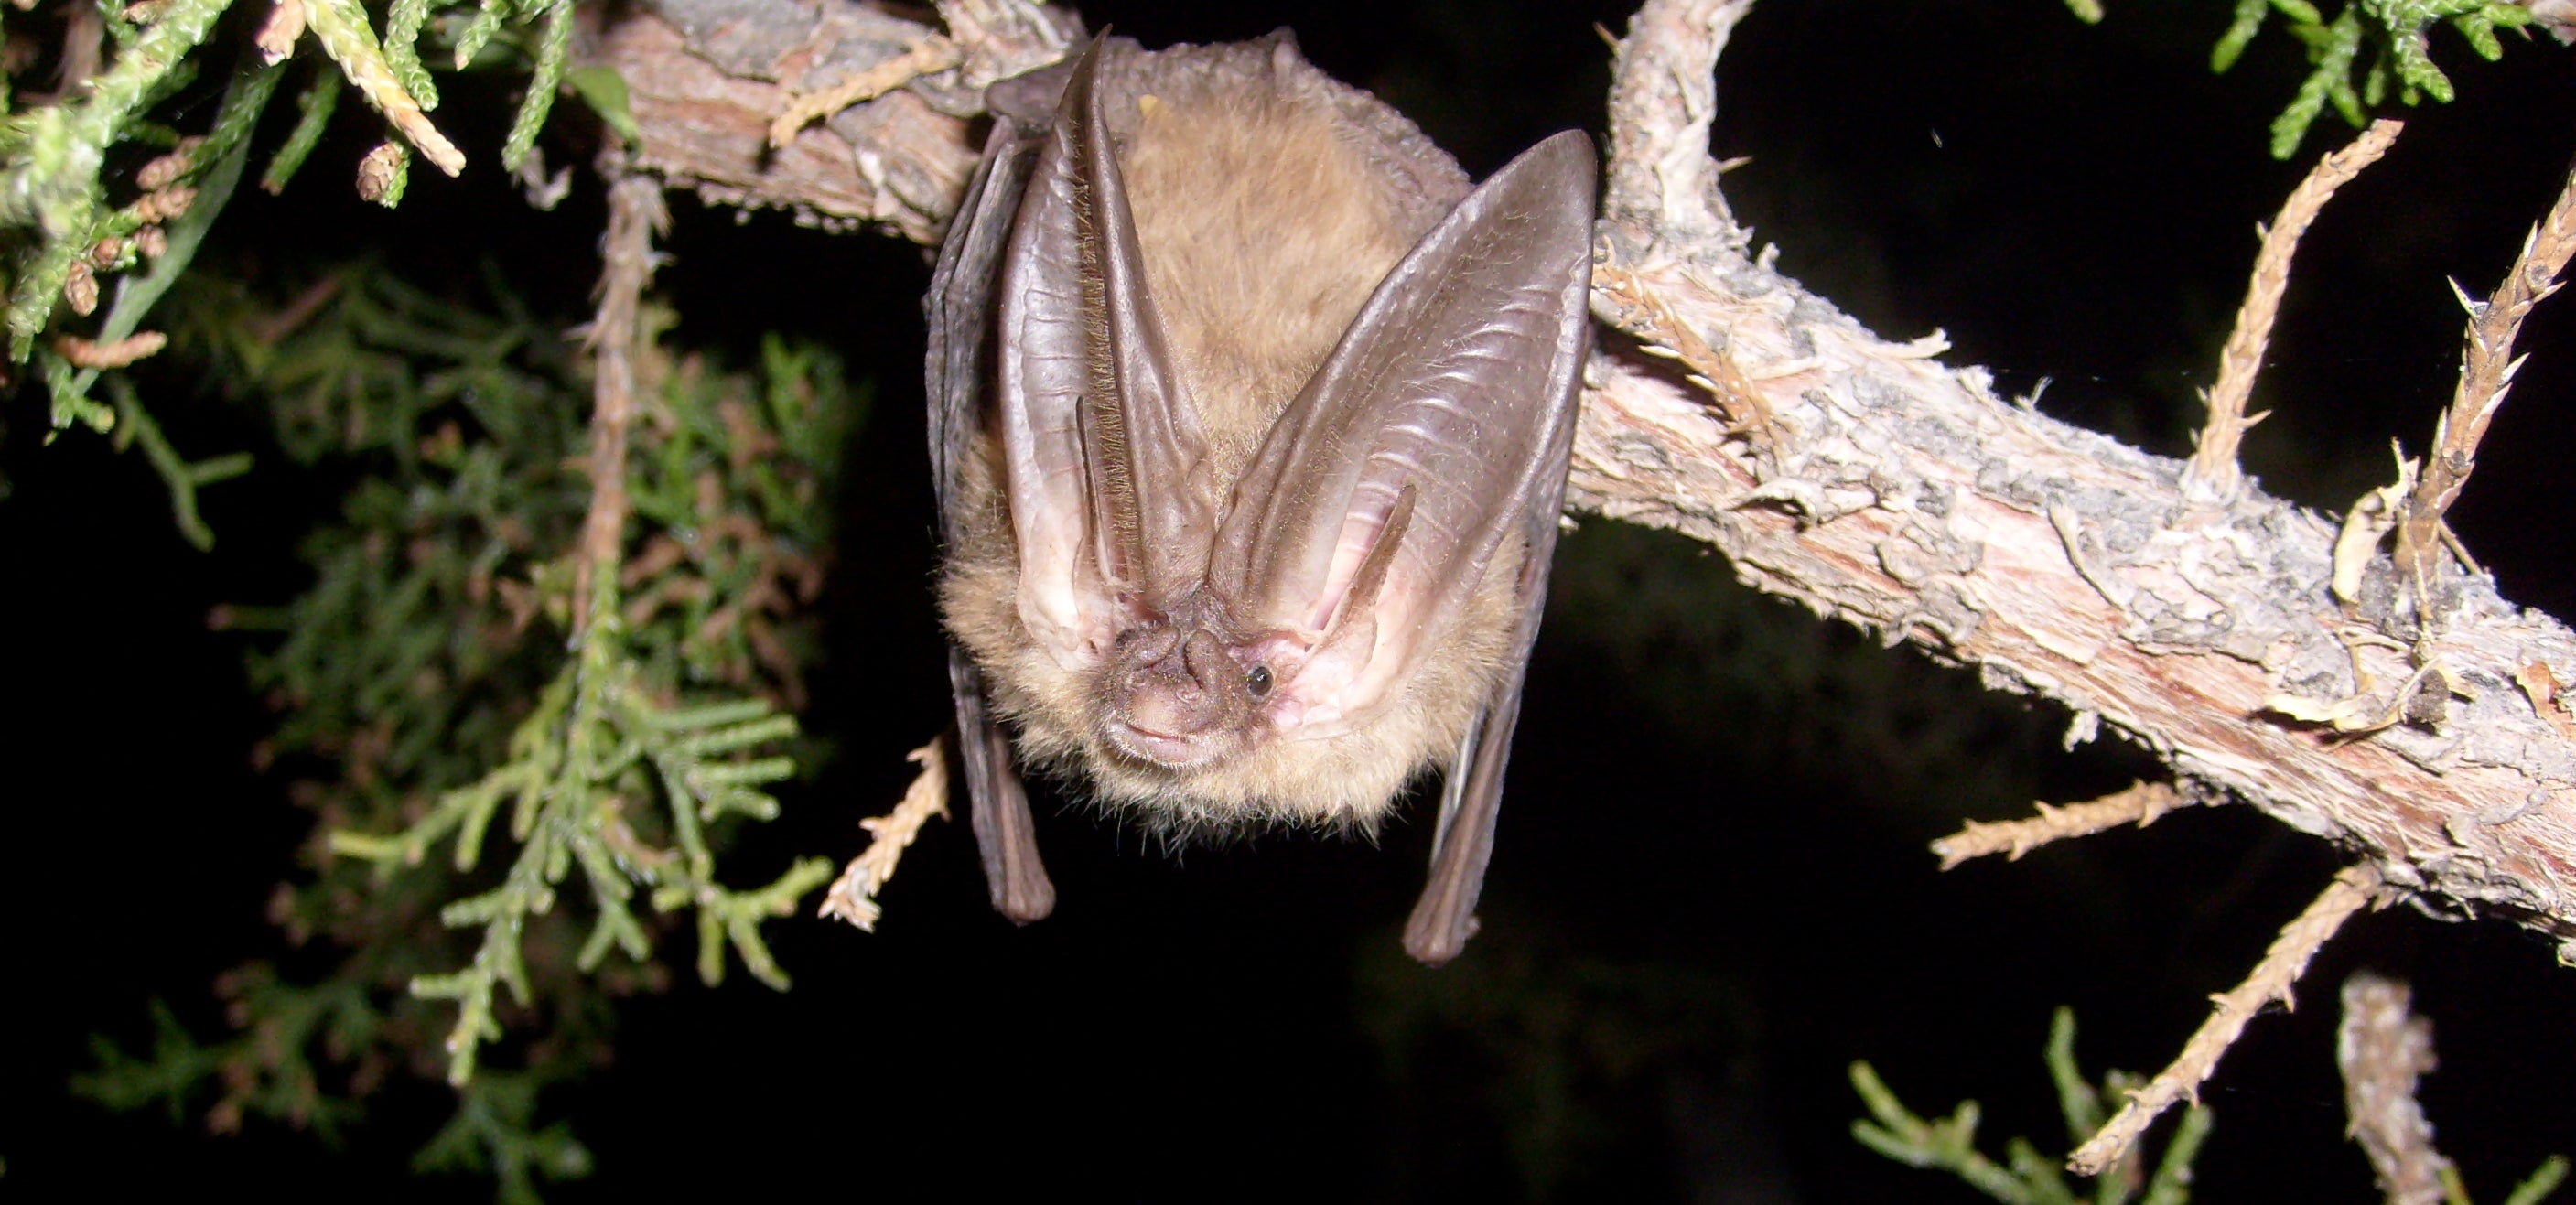 A bat hanging from a tree branch